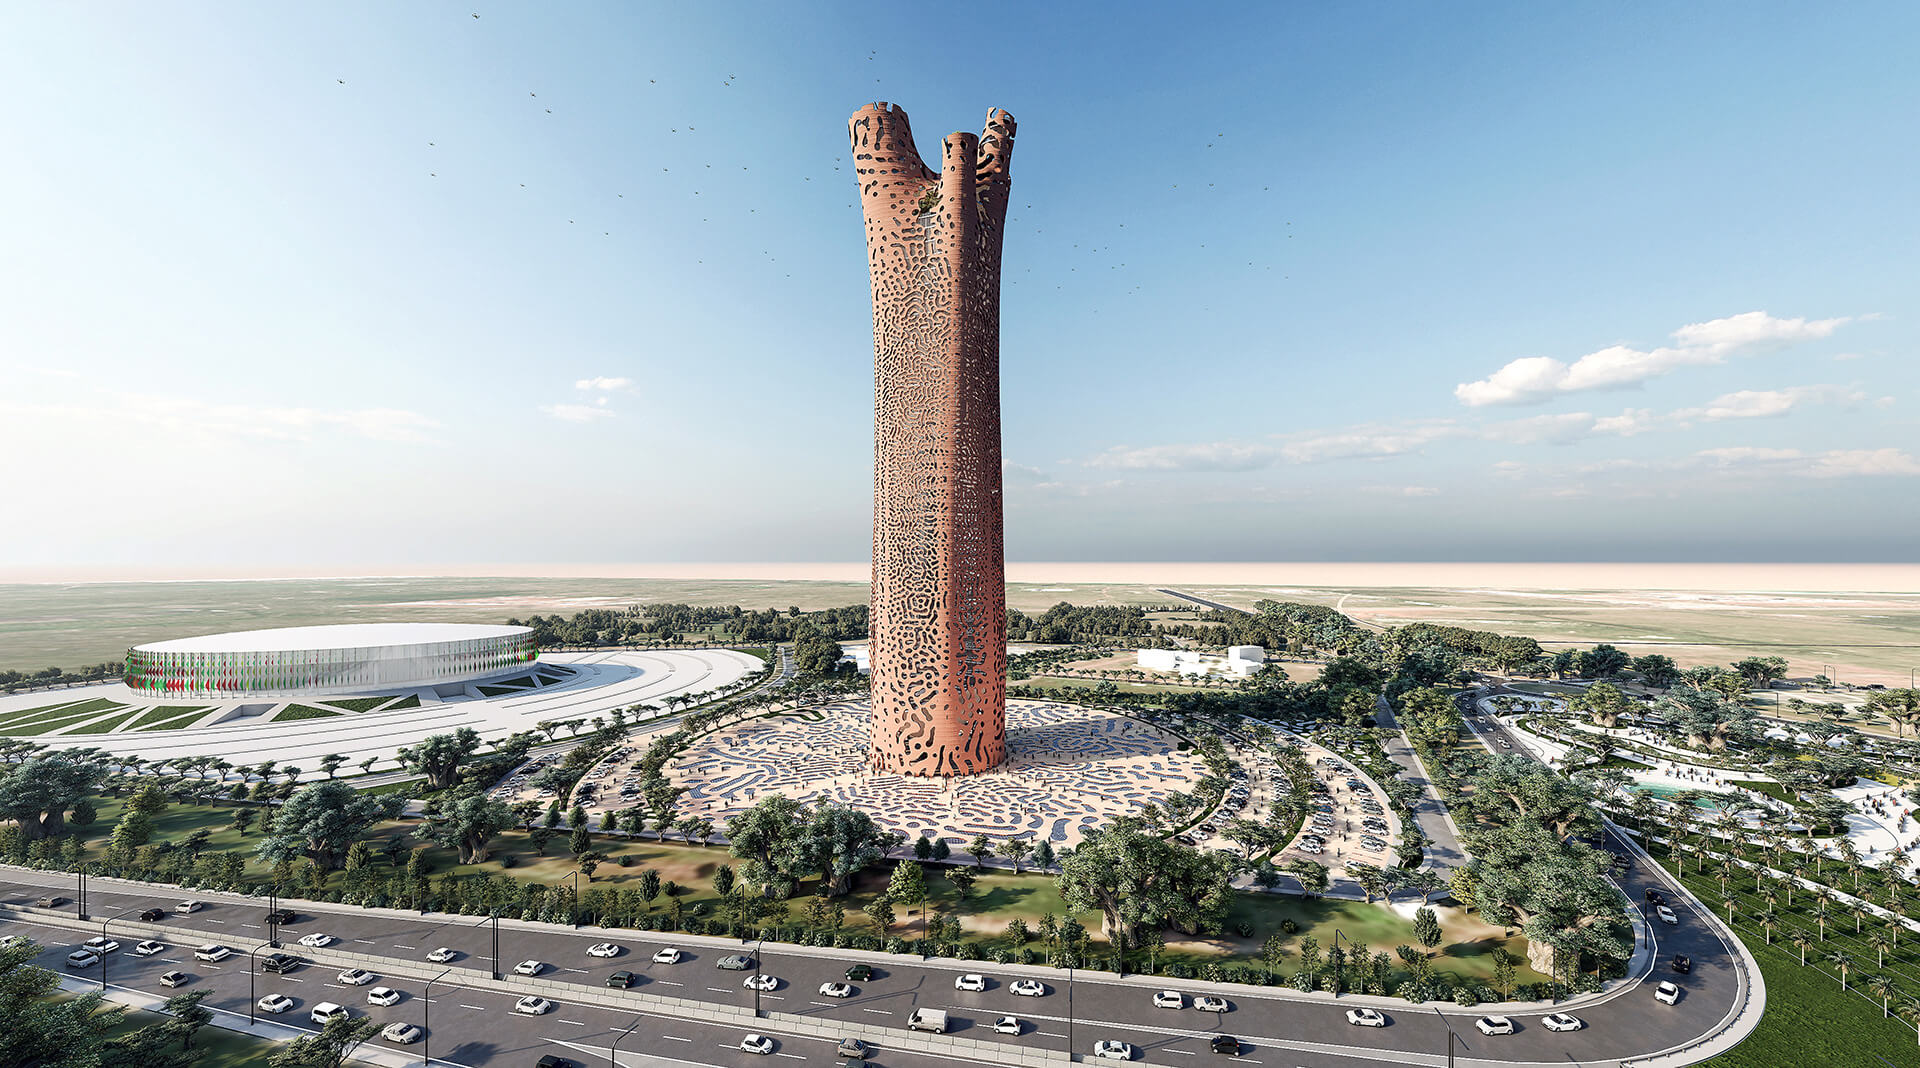 The Tower of Life, Senegal